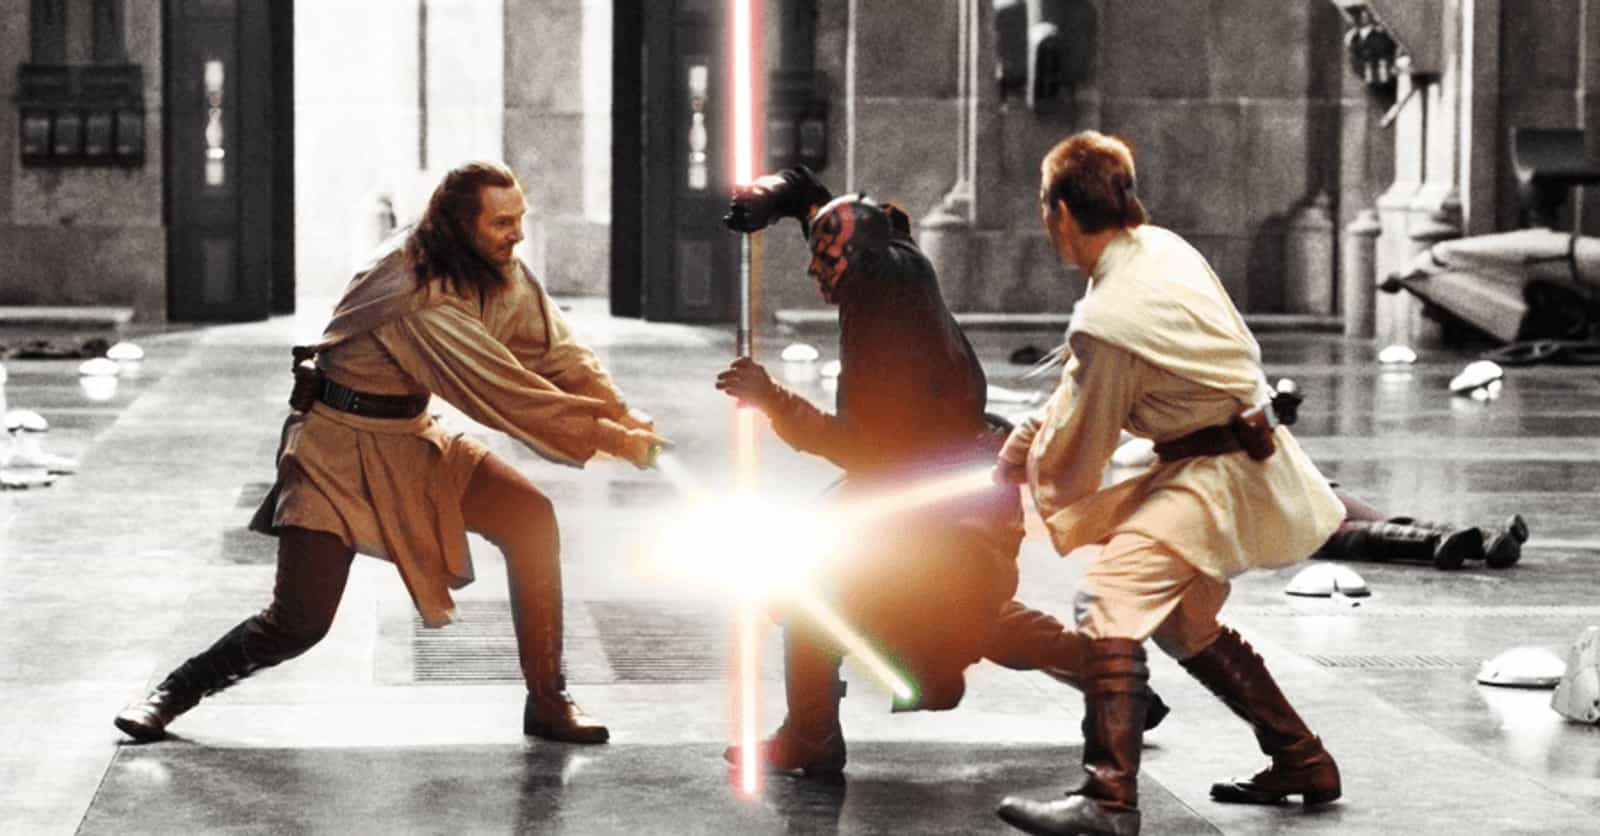 Behind-The-Scenes Stories From ‘Star Wars Episode I: The Phantom Menace’